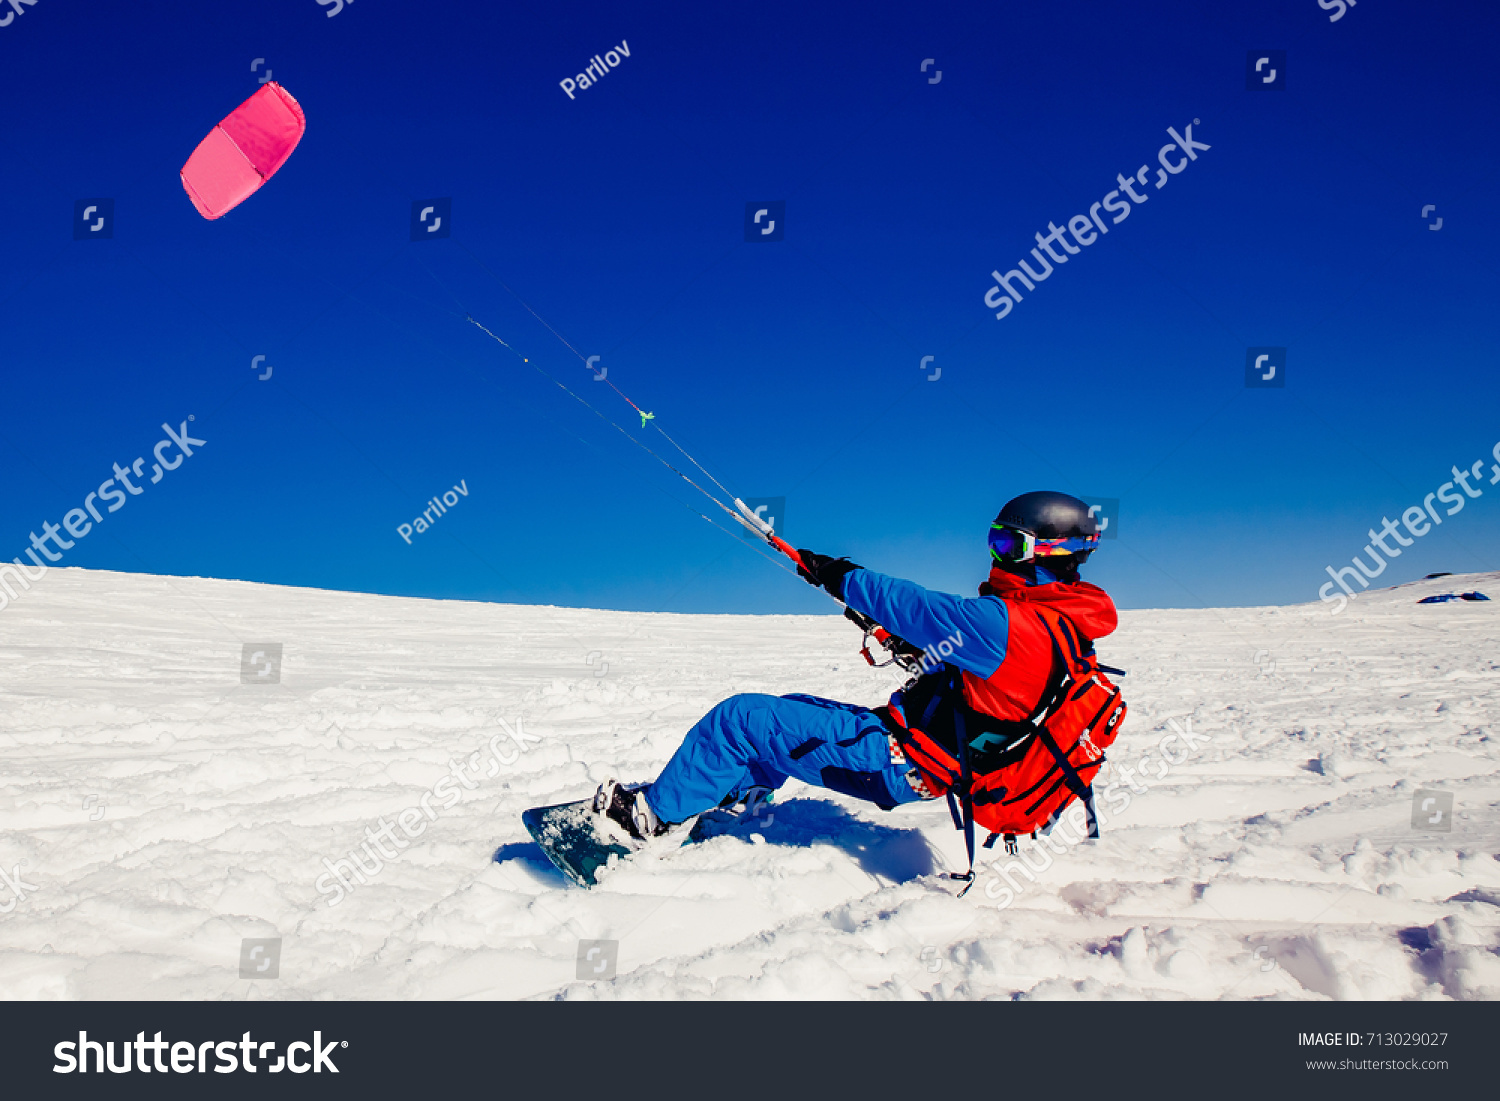 Snowboarder with a kite on fresh snow in the winter in the tundra of Russia against a clear blue sky. Teriberka, Kola Peninsula, Russia. Concept of winter sports snowkite. #713029027